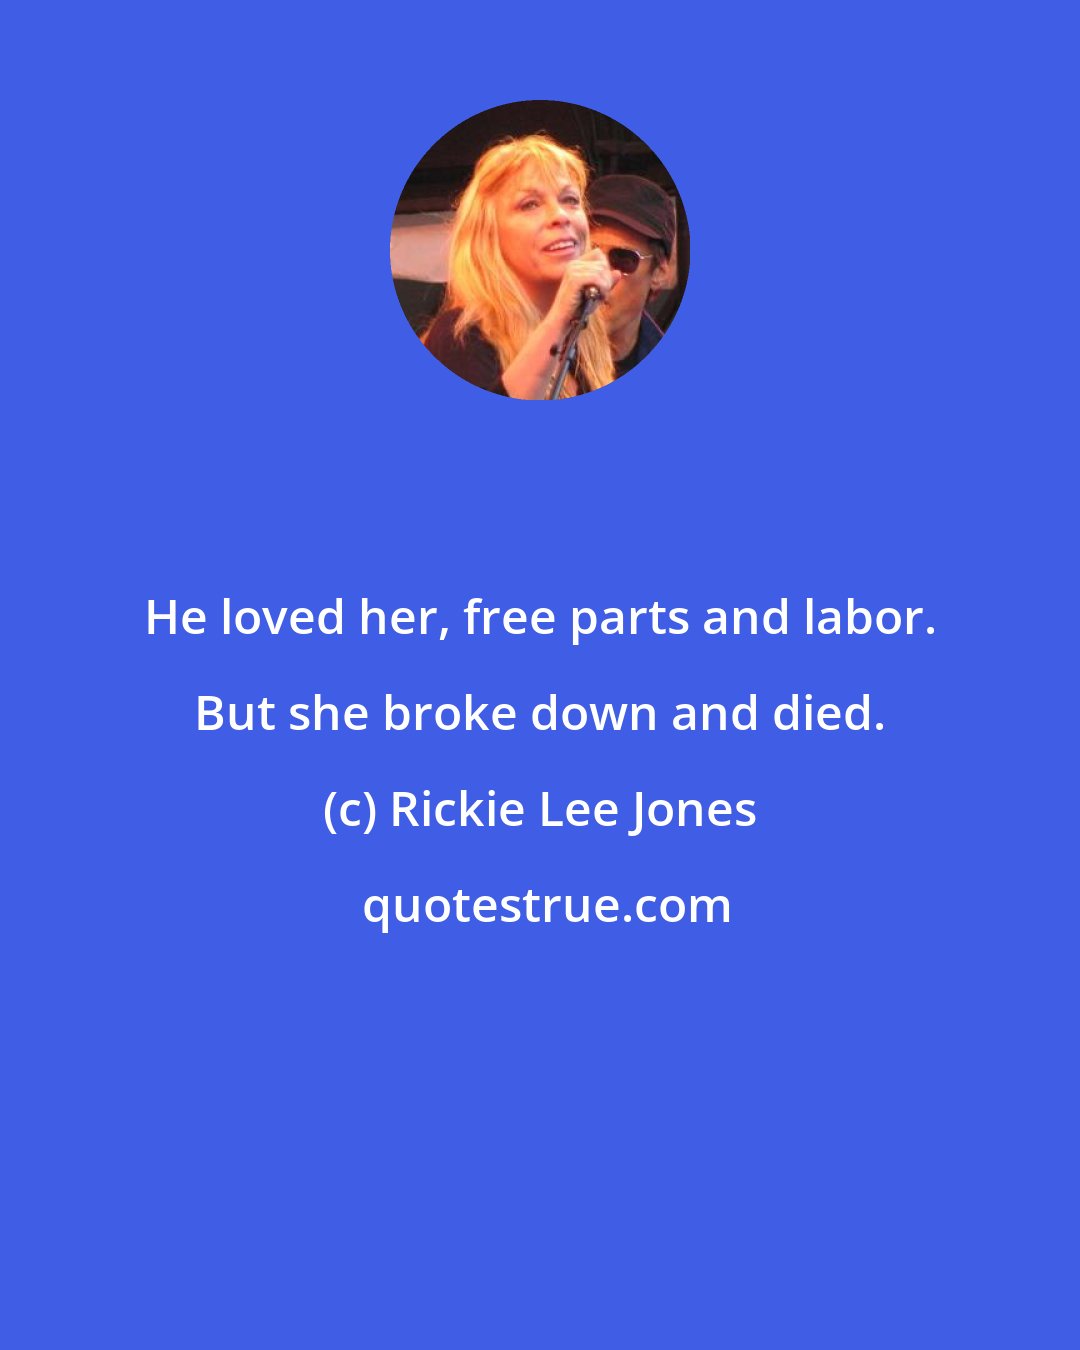 Rickie Lee Jones: He loved her, free parts and labor. But she broke down and died.